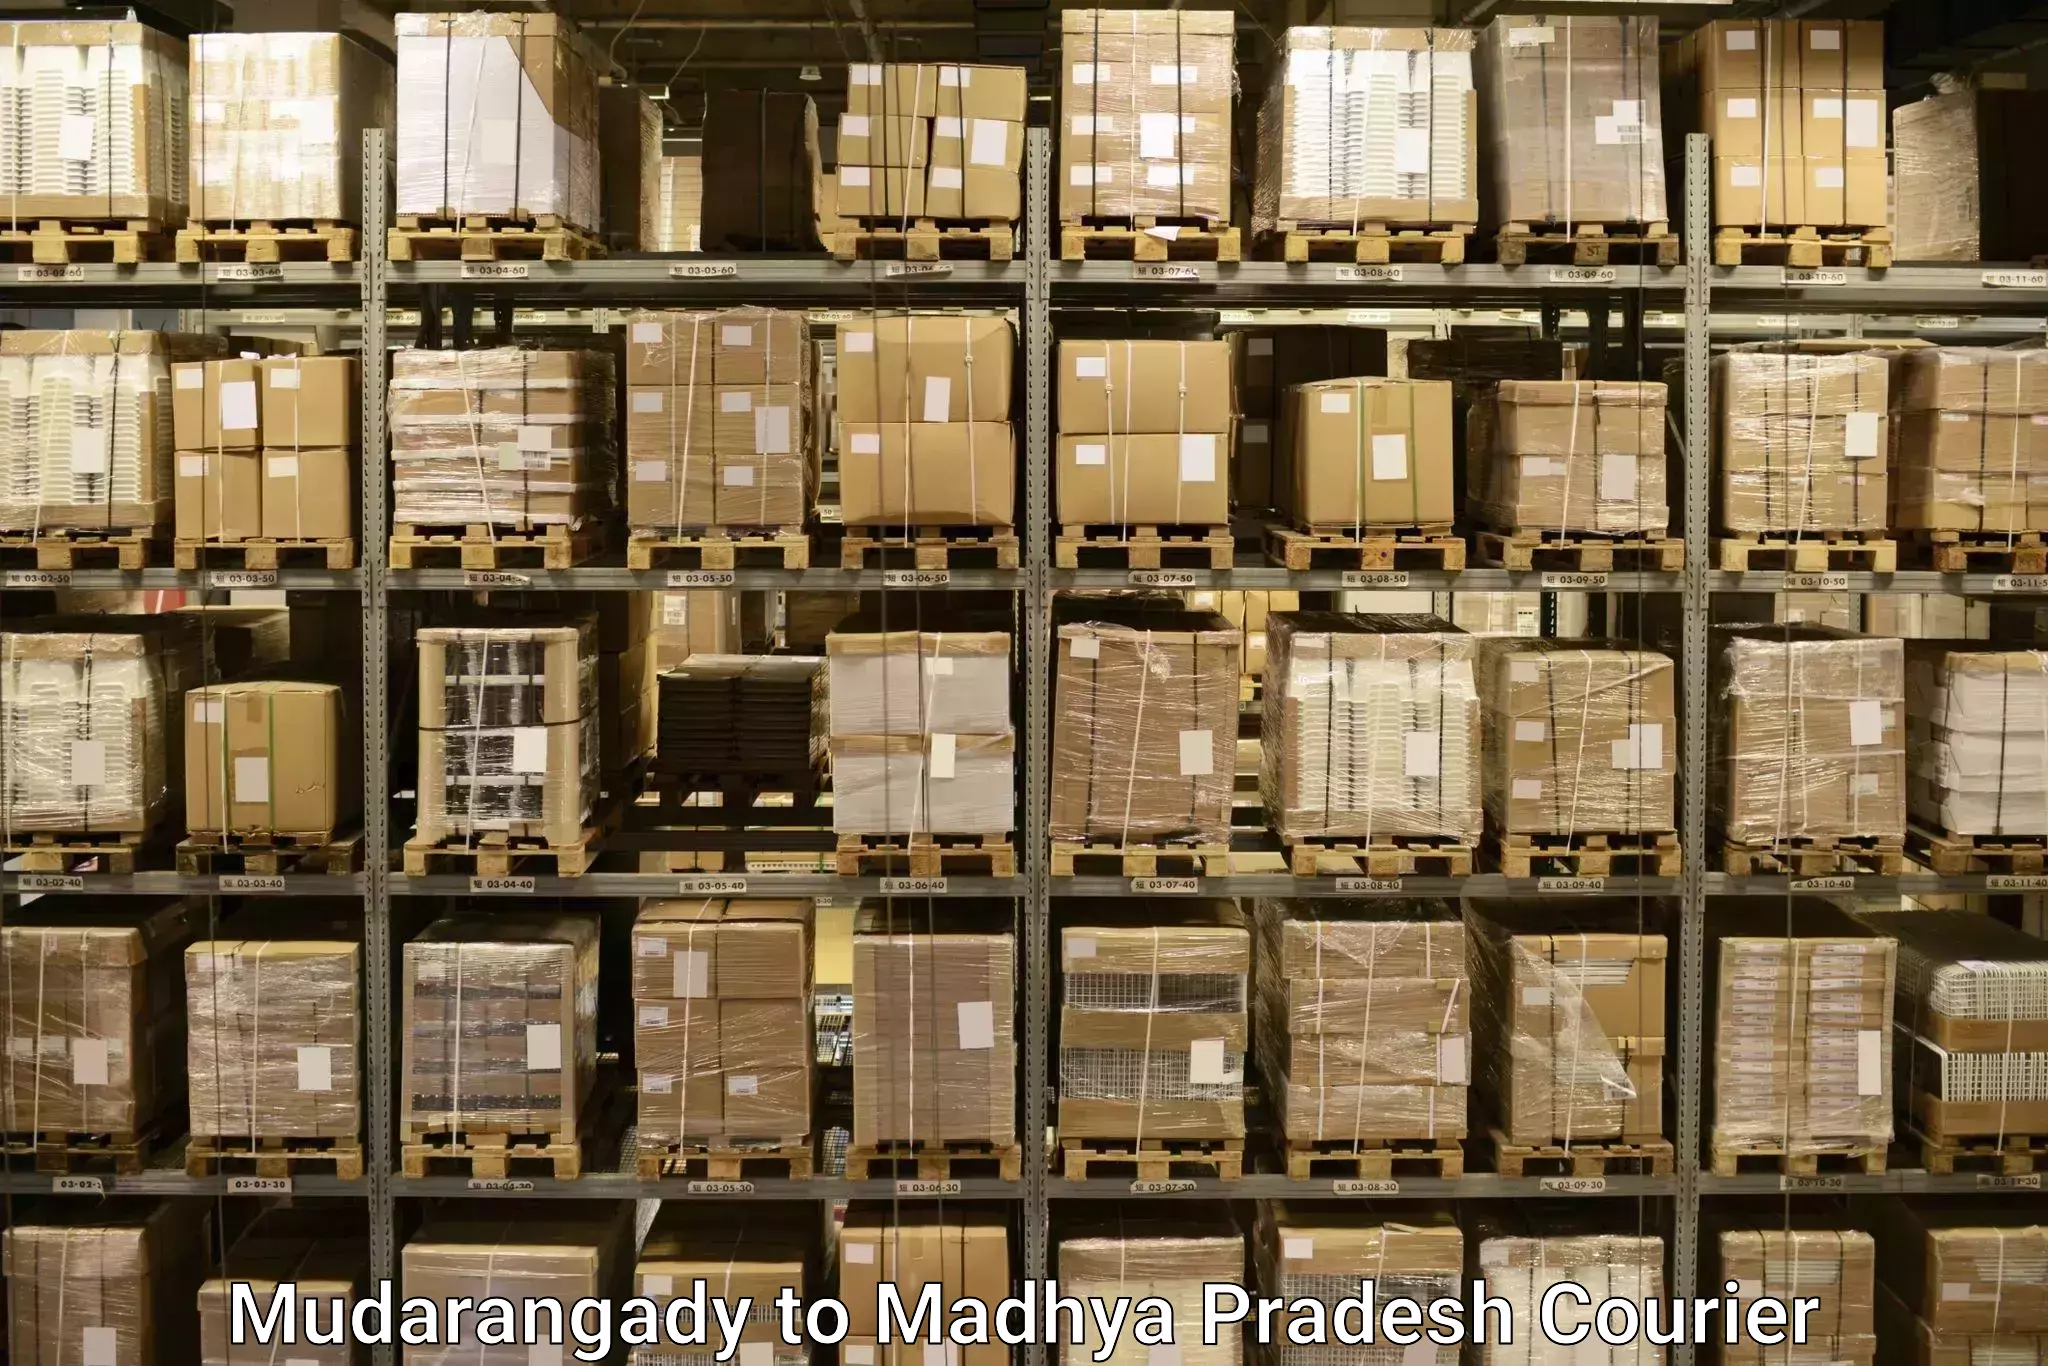 Hassle-free luggage shipping Mudarangady to Indore